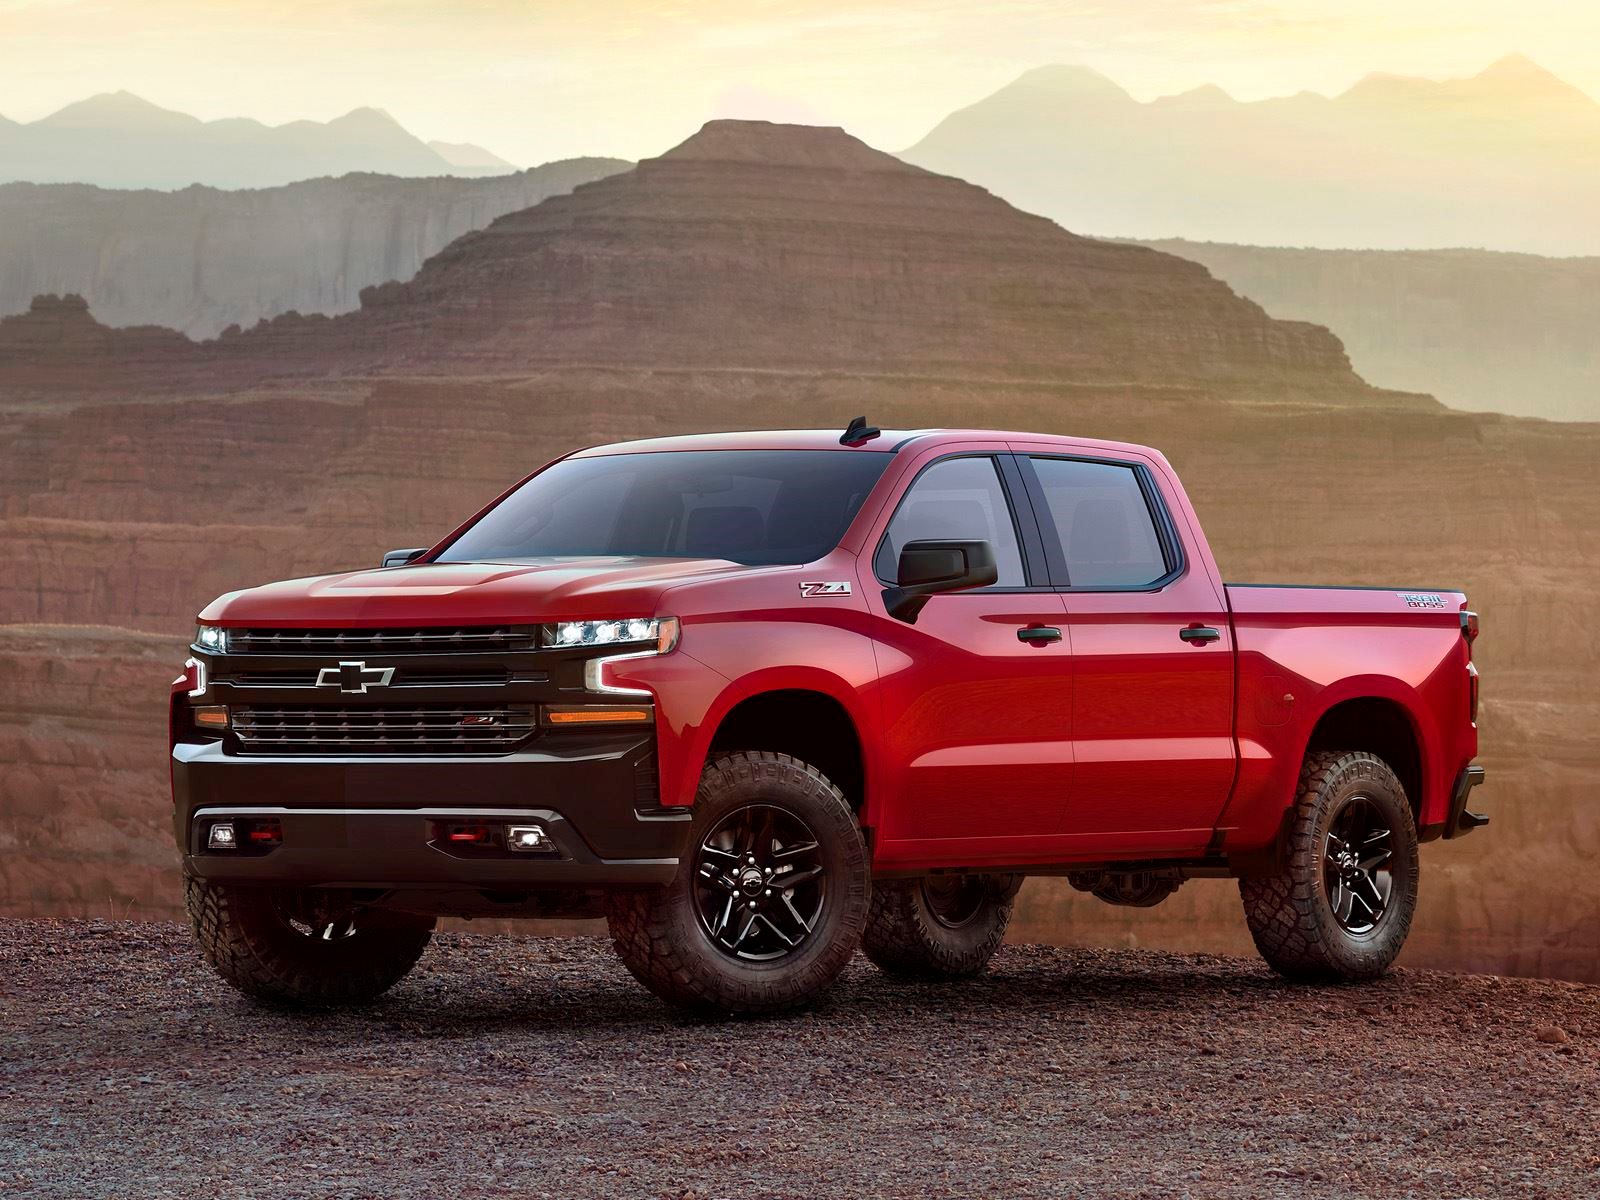 2019 Chevrolet Silverado 1500 First Look Review A Truck For Everyone